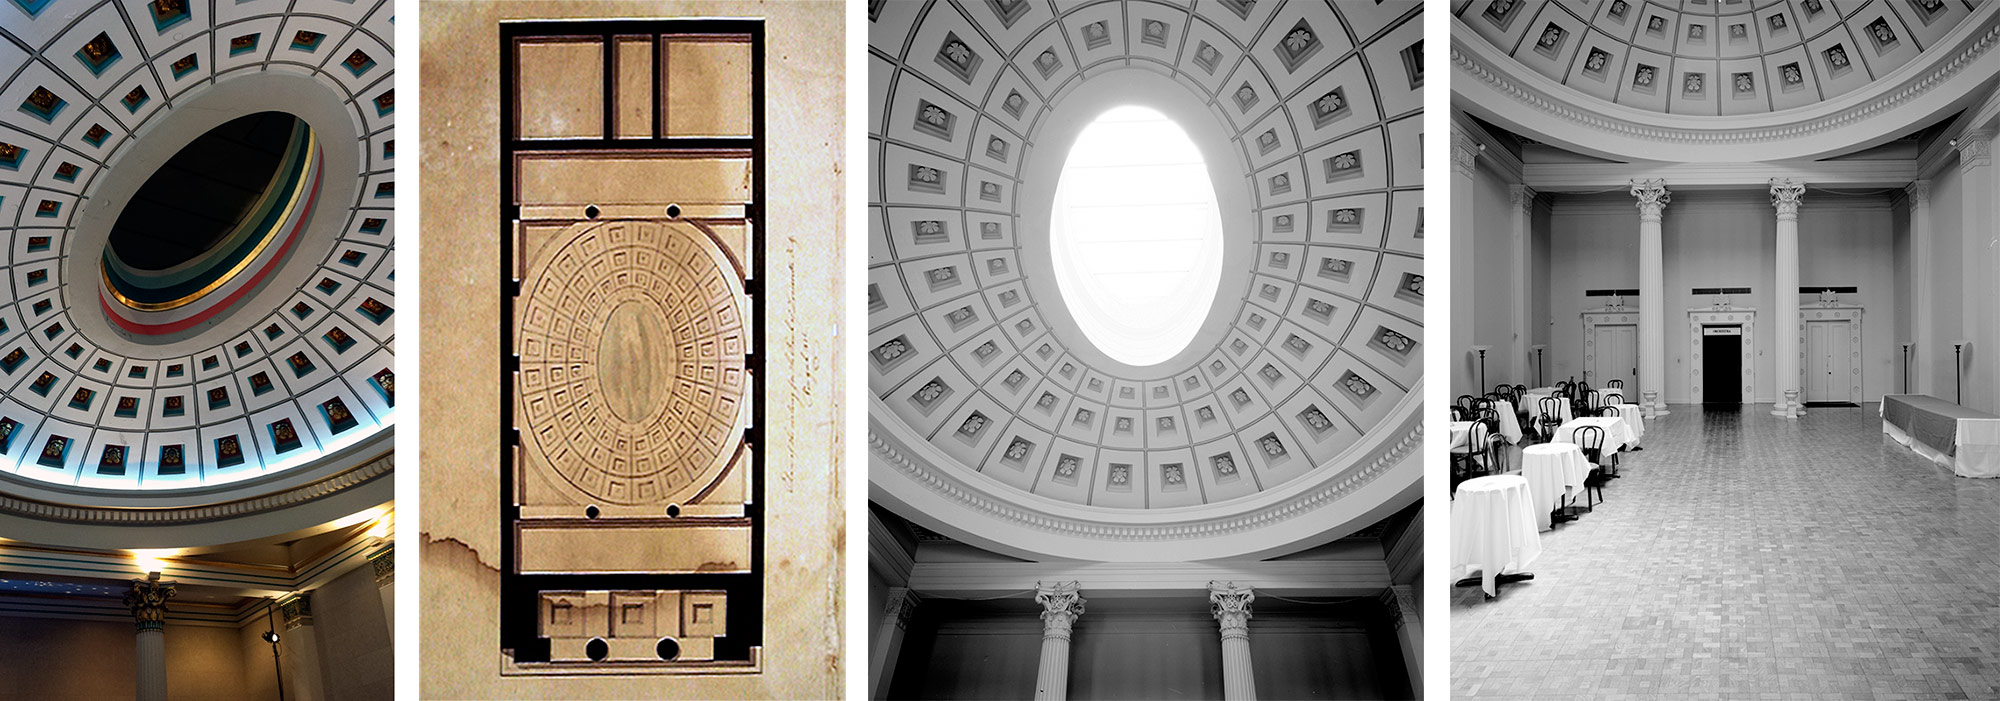 Interior views and ceiling plan. (Courtesy Tipster; New Orleans Public Library; Library of Congress)